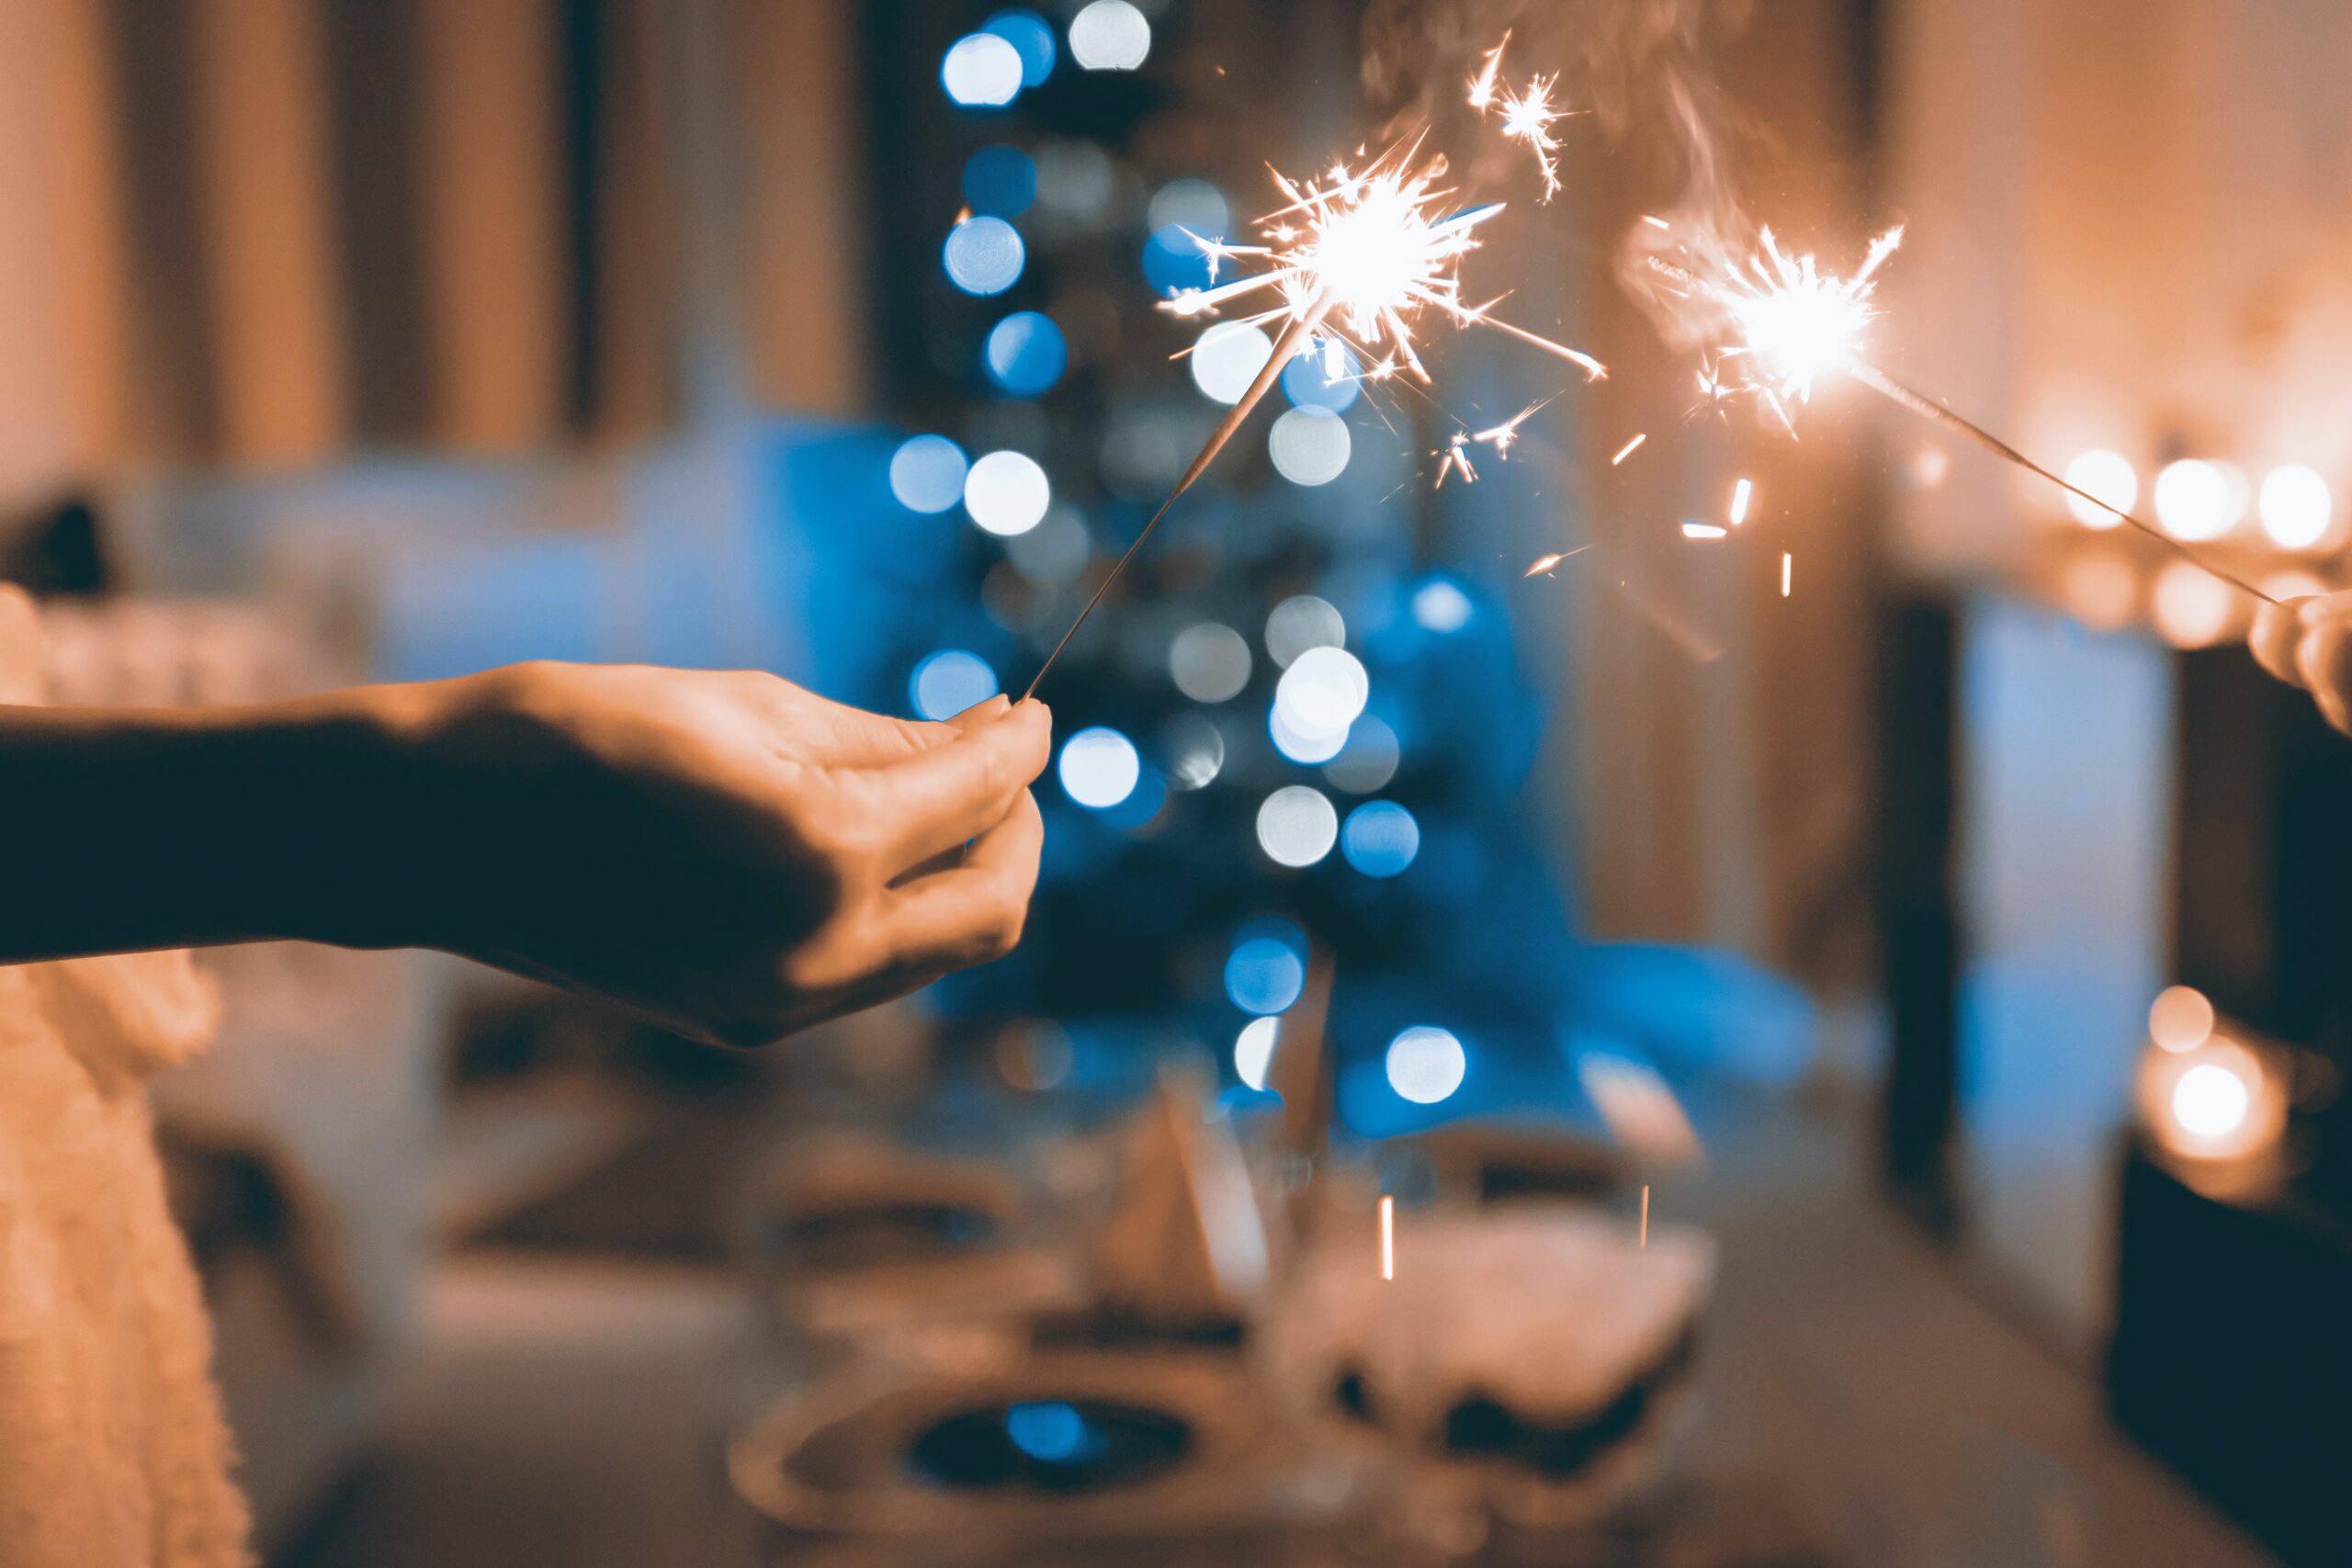 A person holding a sparkler in front of a Christmas tree.